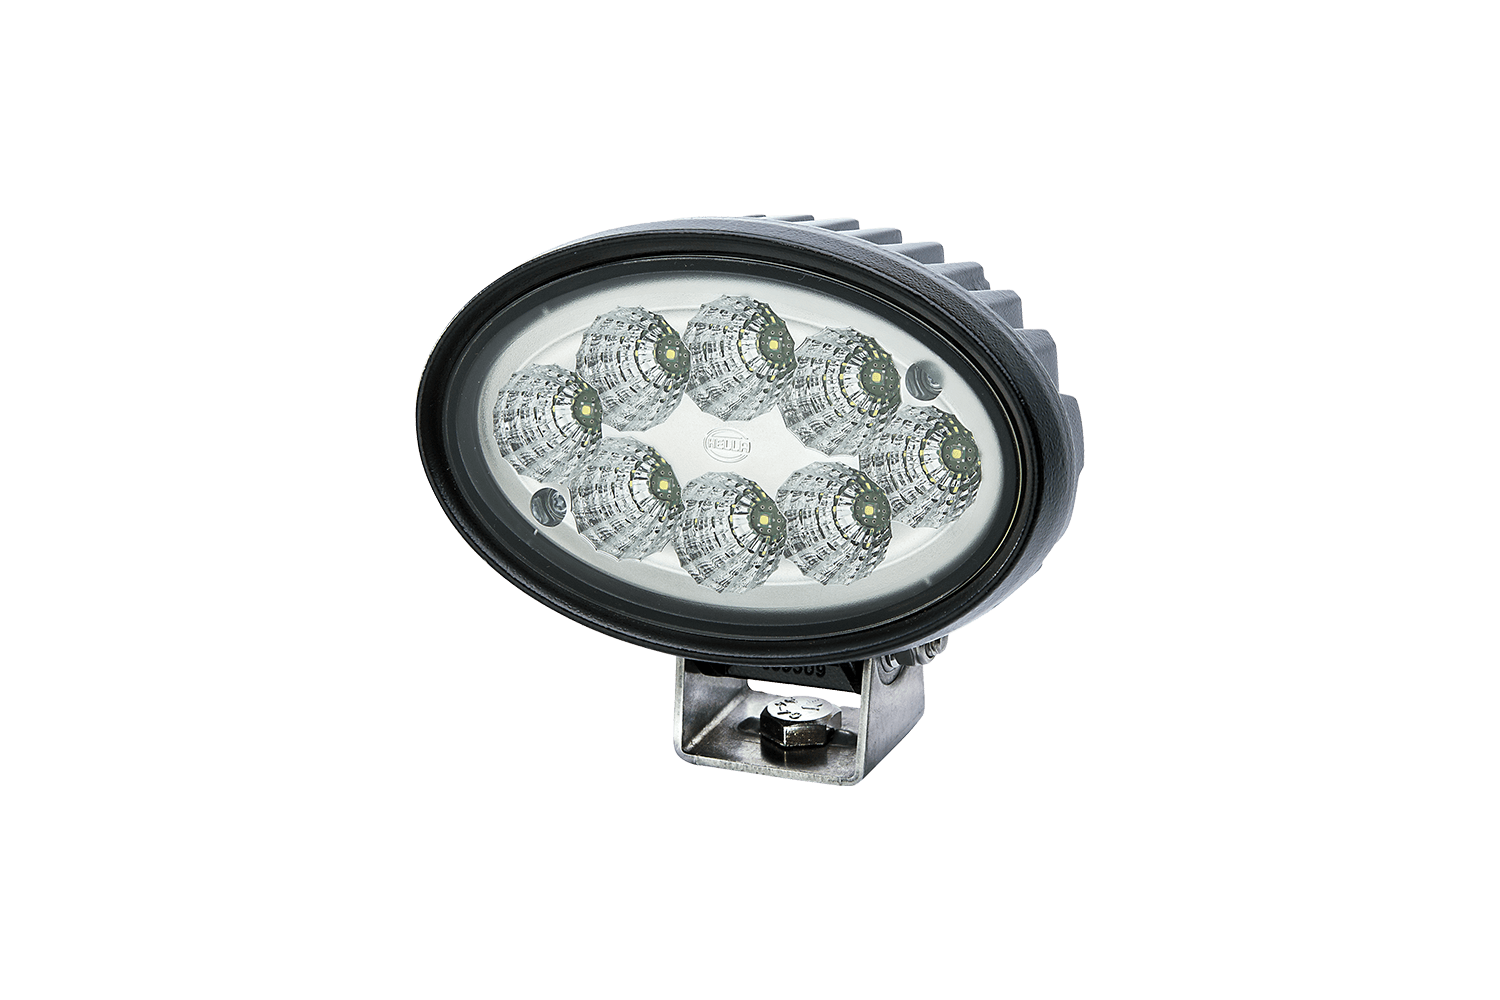 Oval 100 LED Generation 2 work lamps from Hella offered by Patlon